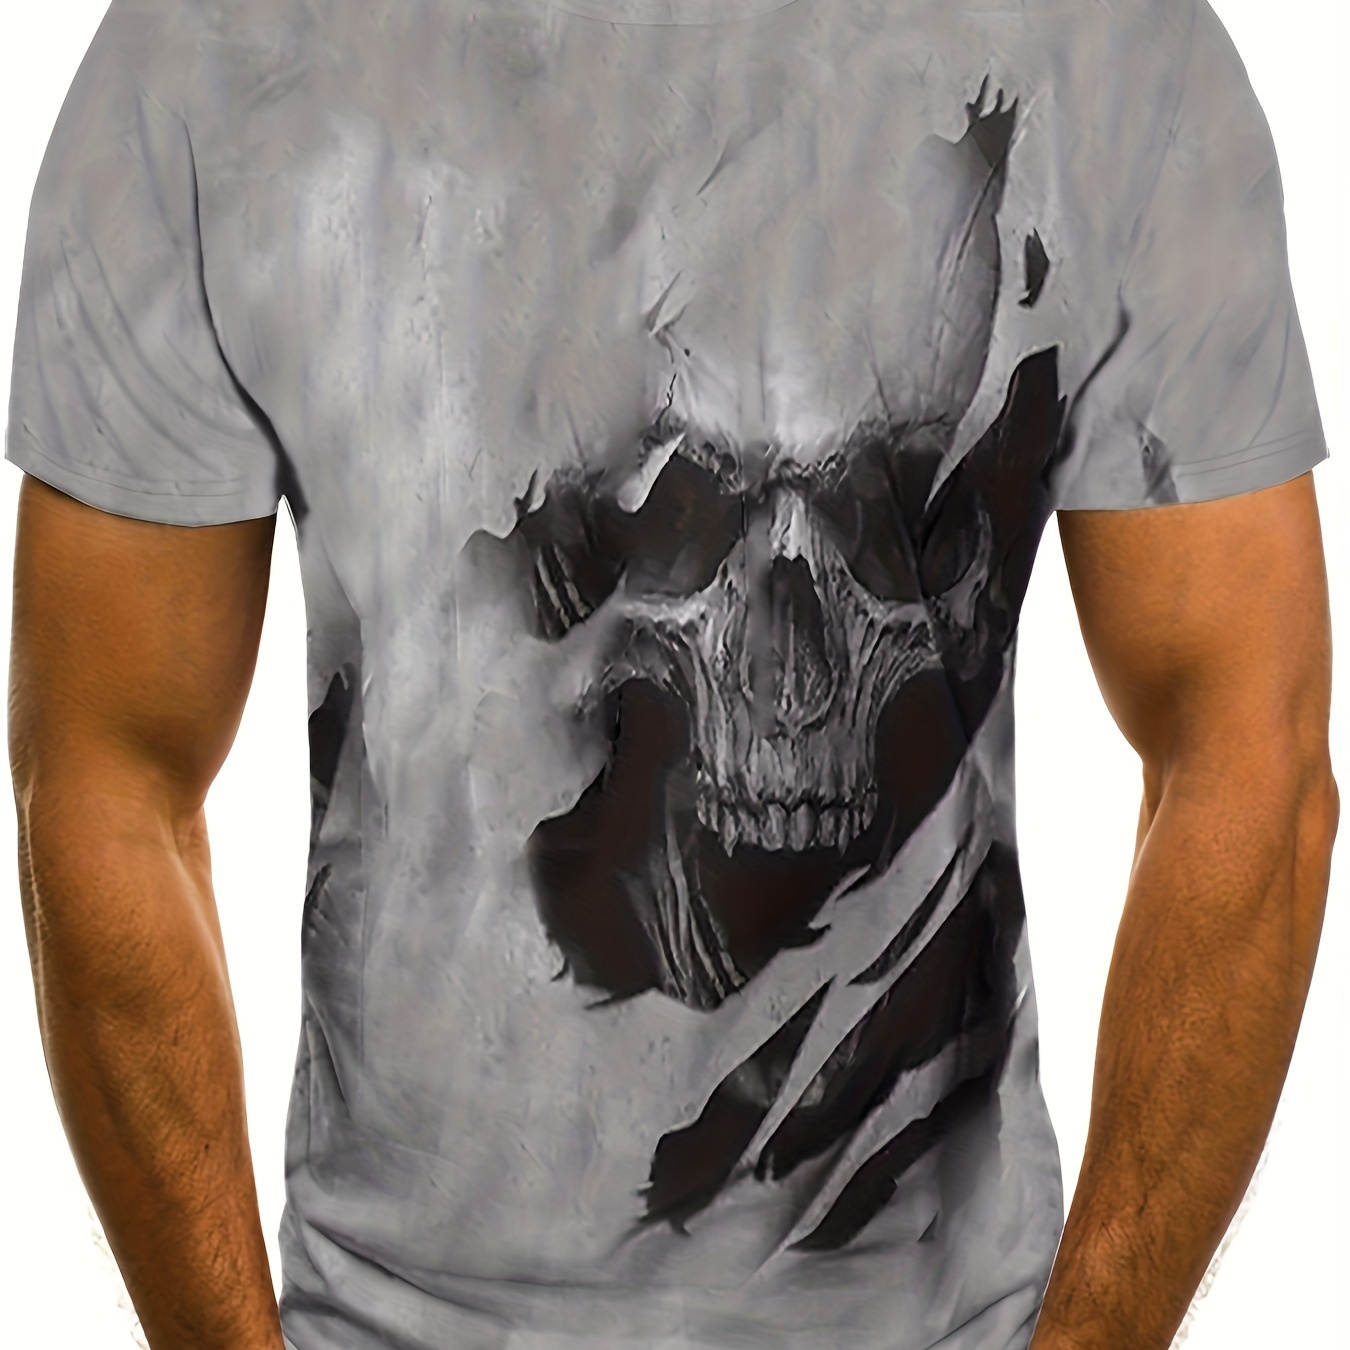 

Skull Print, Men's Graphic Design Crew Neck Active T-shirt, Casual Comfy Tees Tshirts For Summer, Men's Clothing Tops For Daily Gym Workout Running